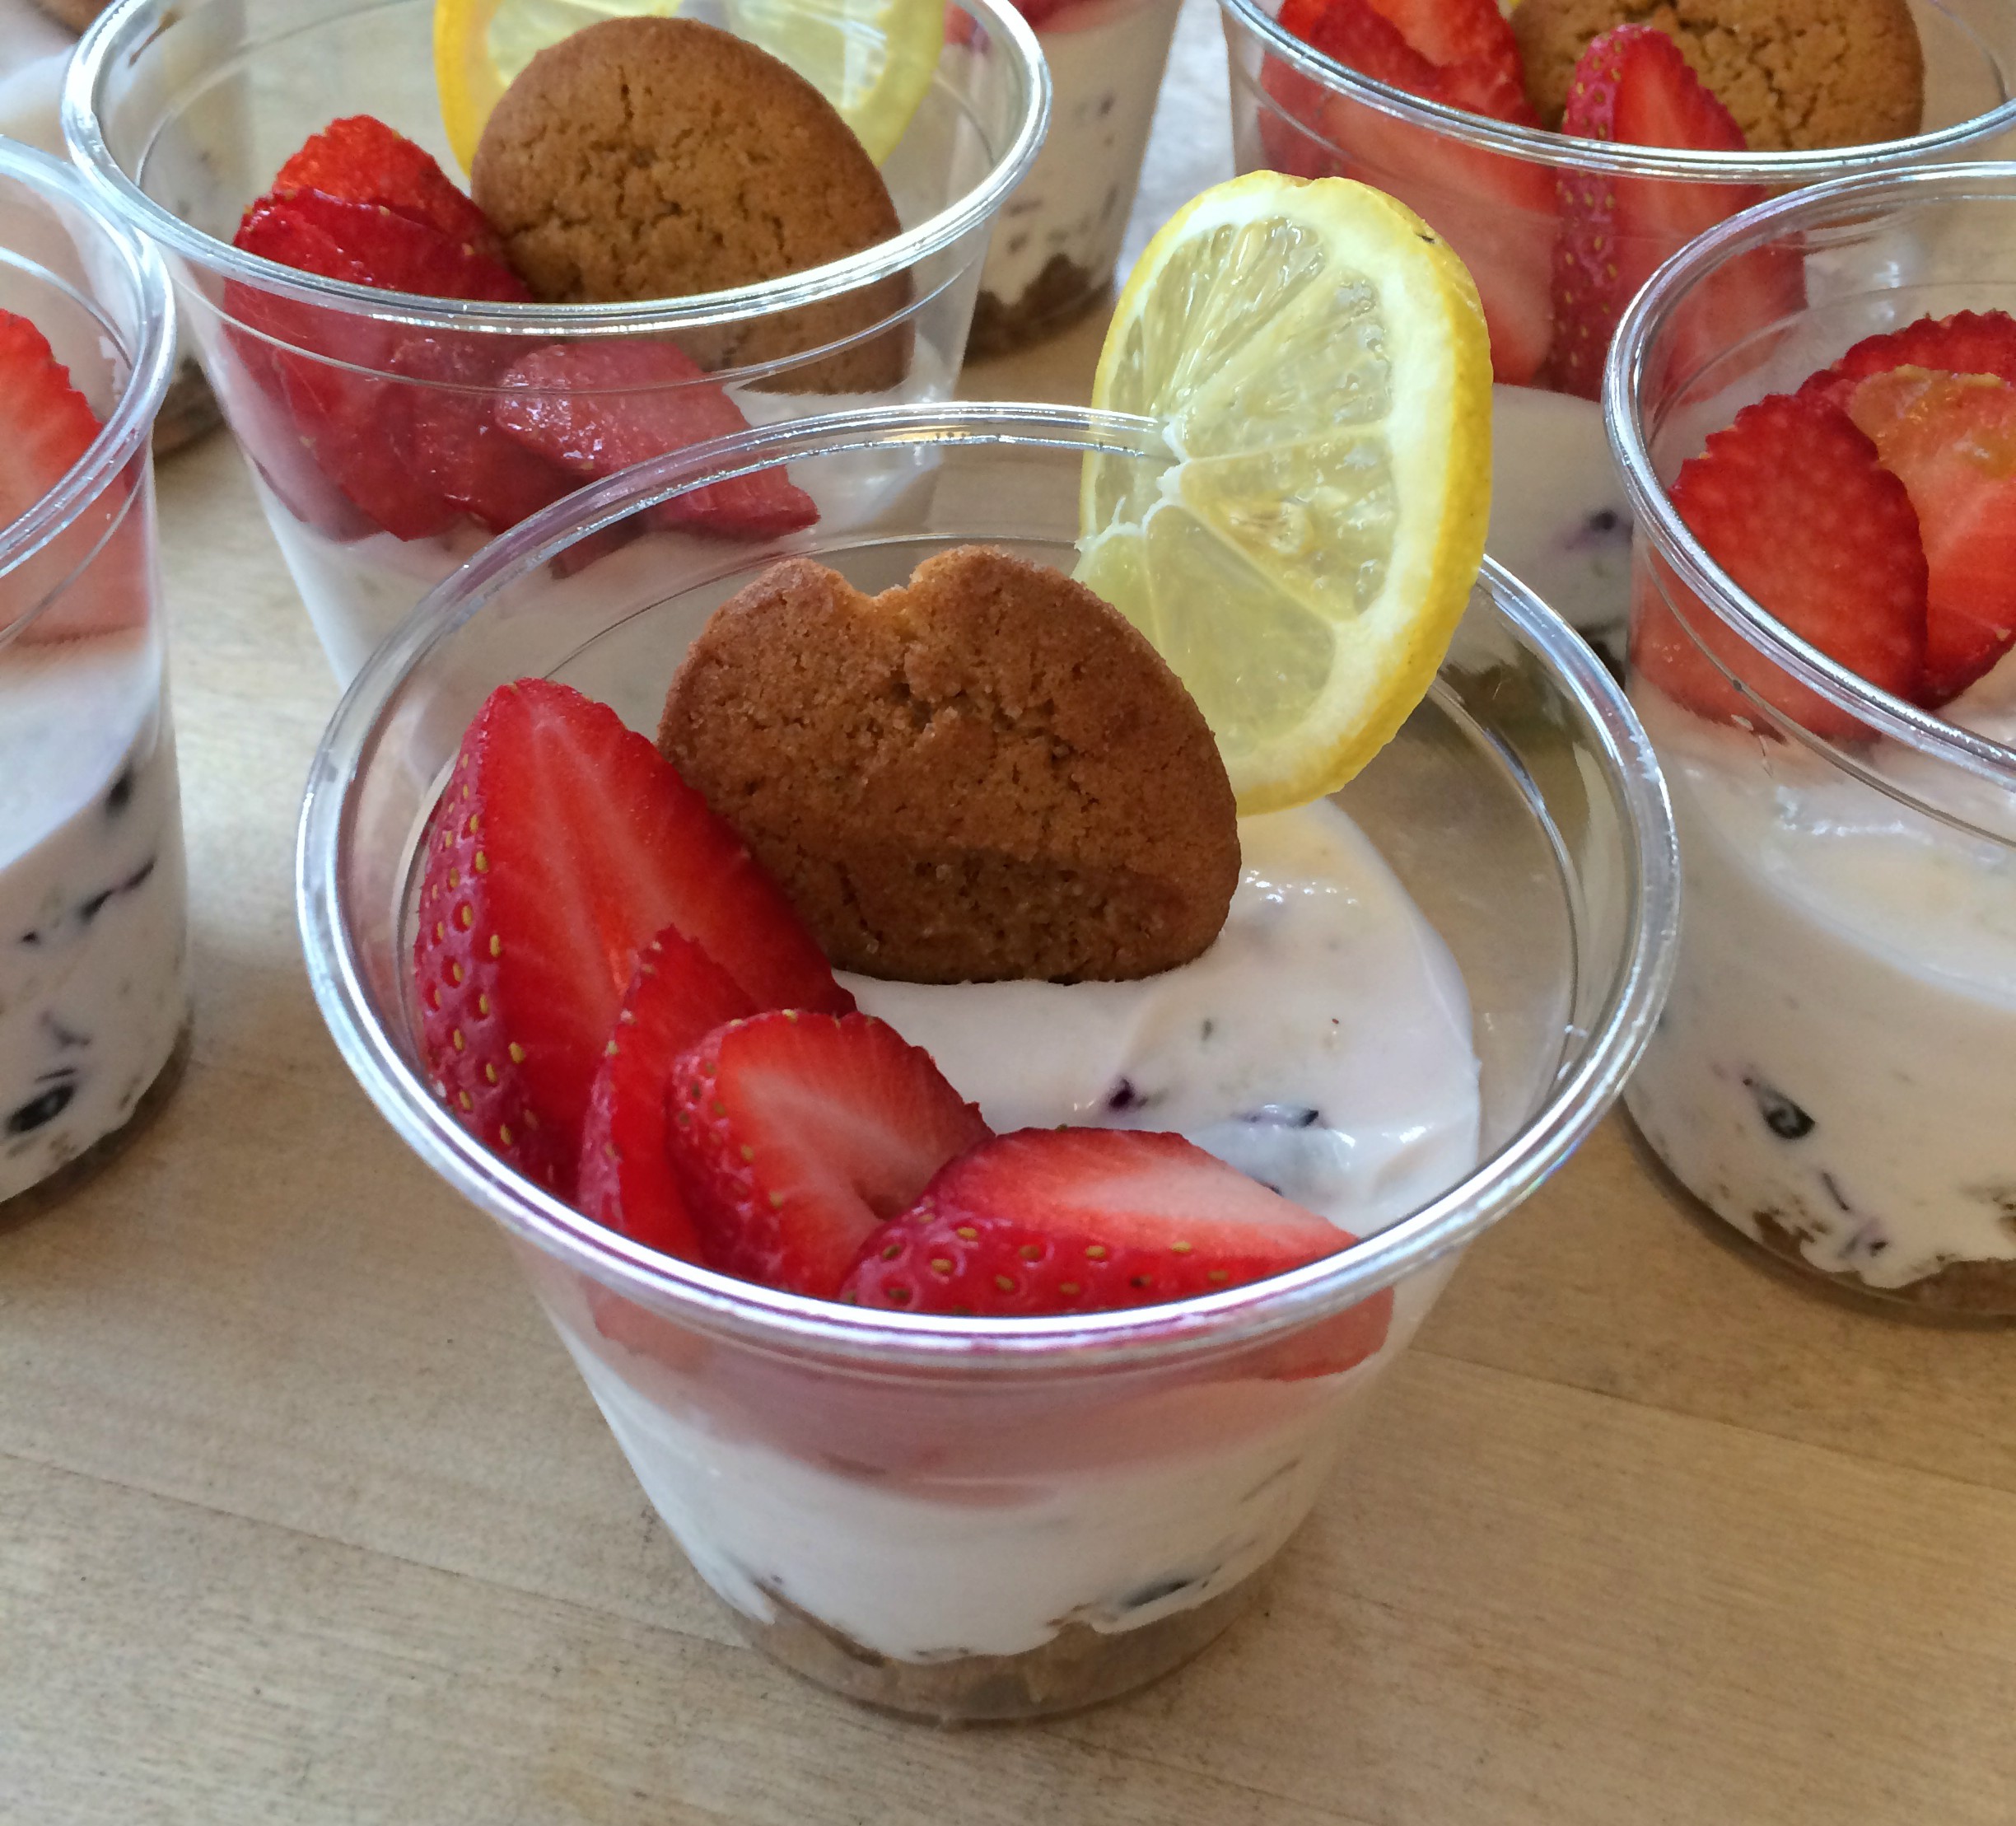 Strawberry, Blueberry, Lemon Cheesecake Cups with Ginger Snap Crust